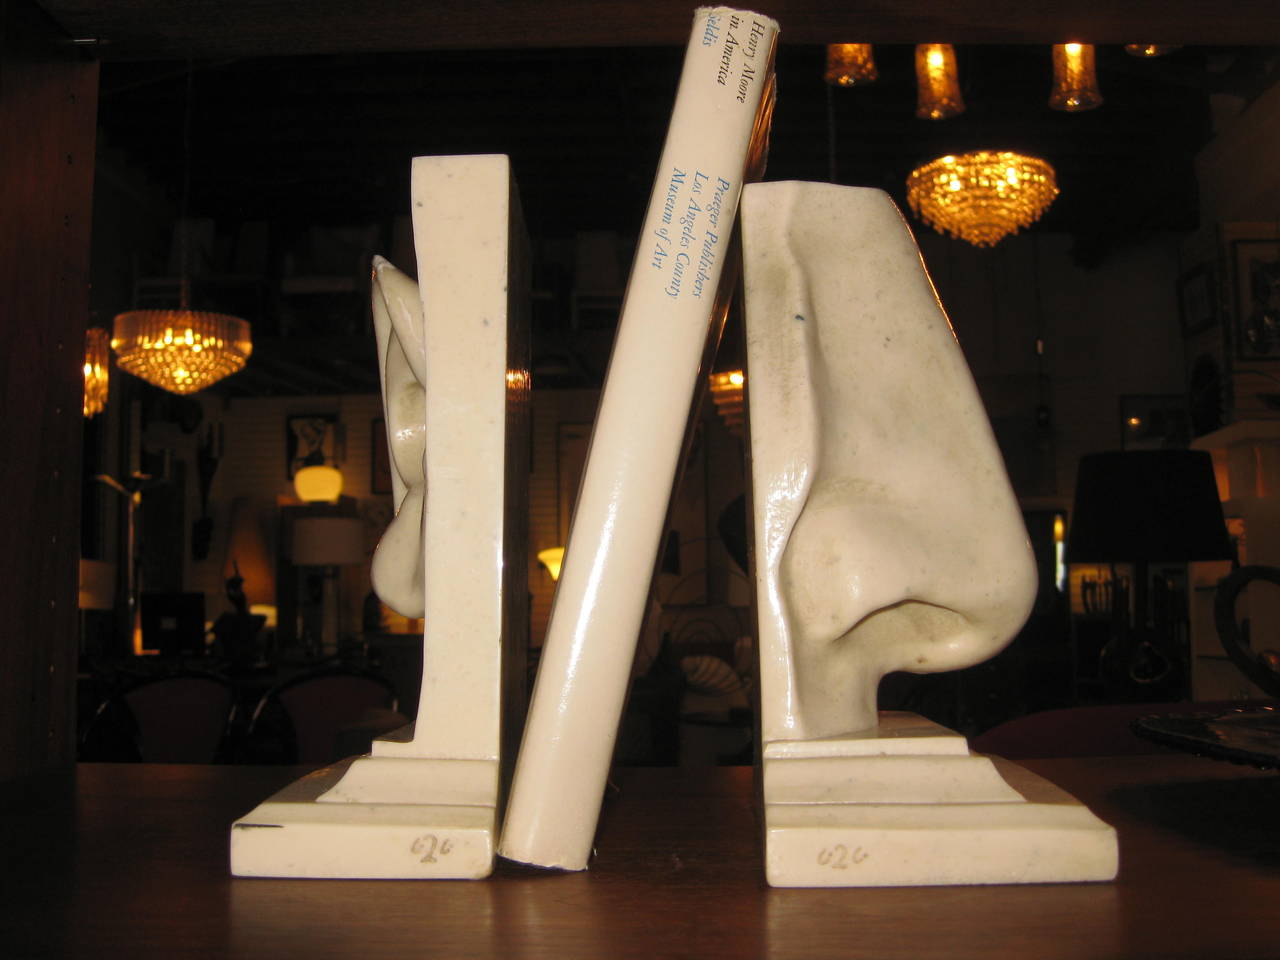 A pair of figural bookends from Italy rendered in resin.
The indicated measurements are for the nose. The ear measures 3.13